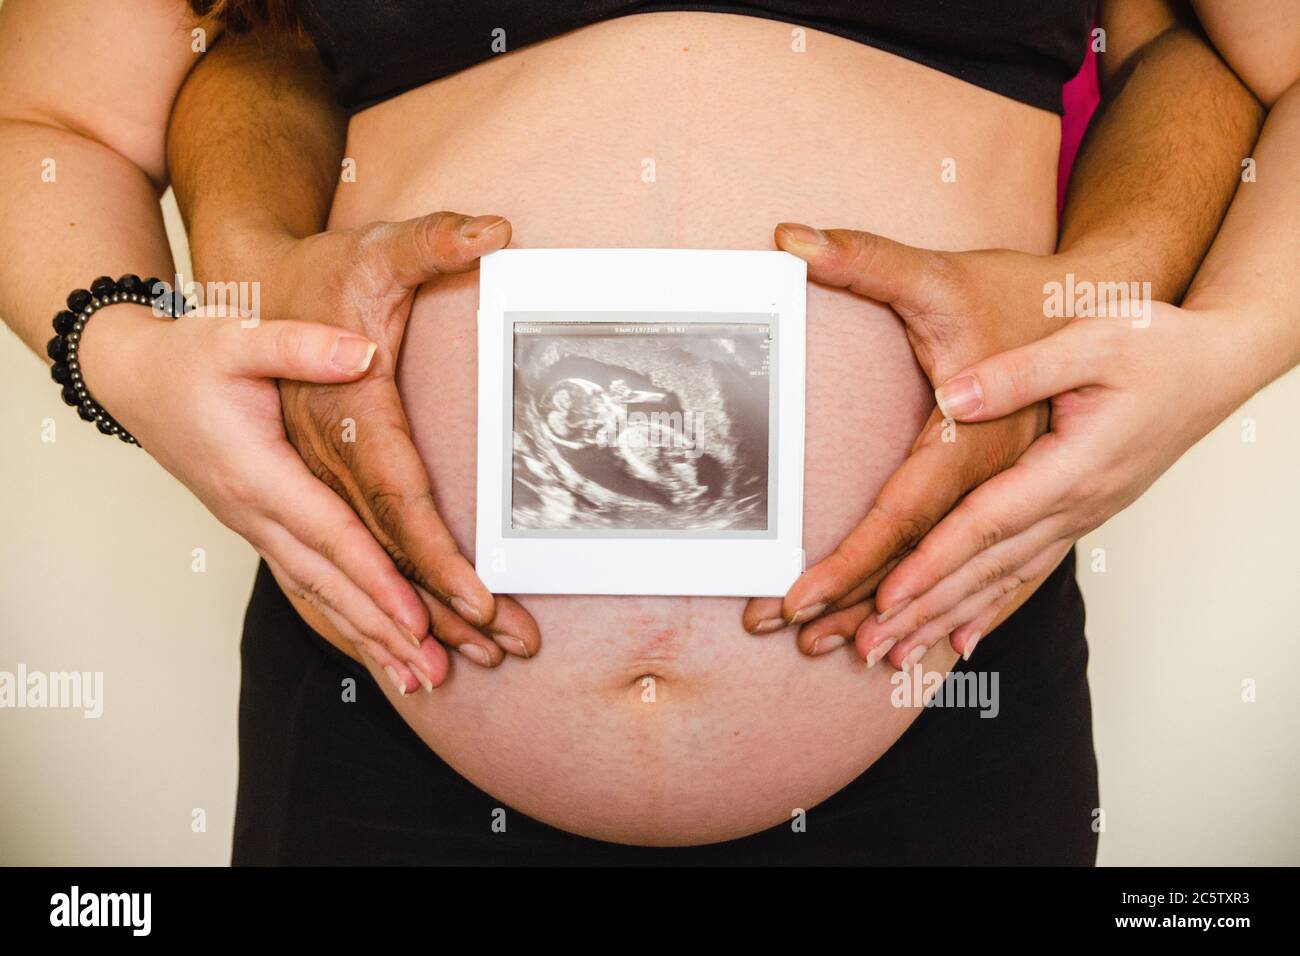 Ultrasound image of mother's belly held by mum and dad Stock Photo